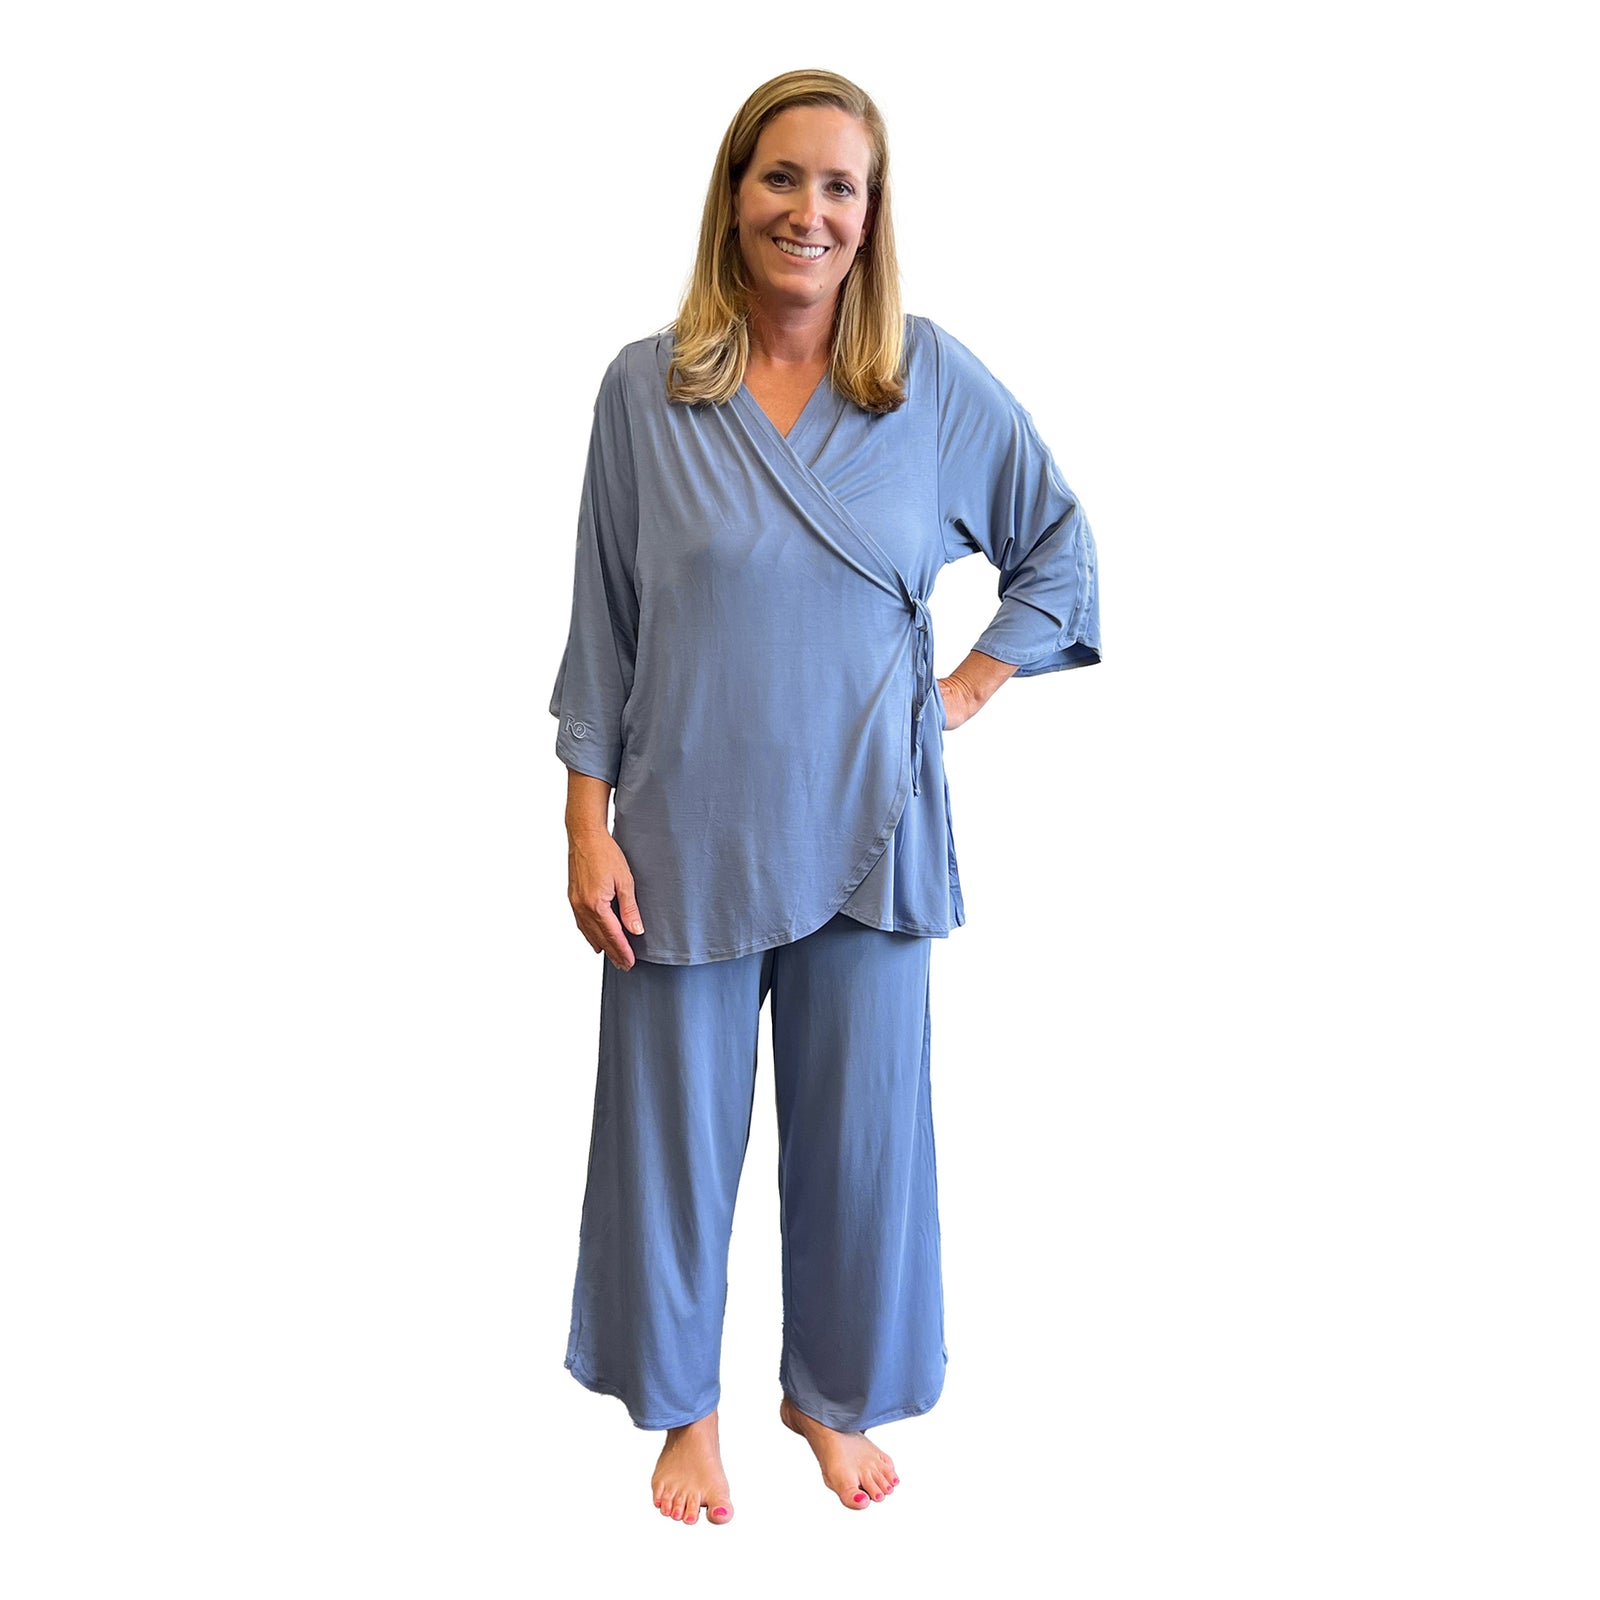 Hospital pajamas for cancer patients with snap sleeves for IVs, Chemo ports and more.